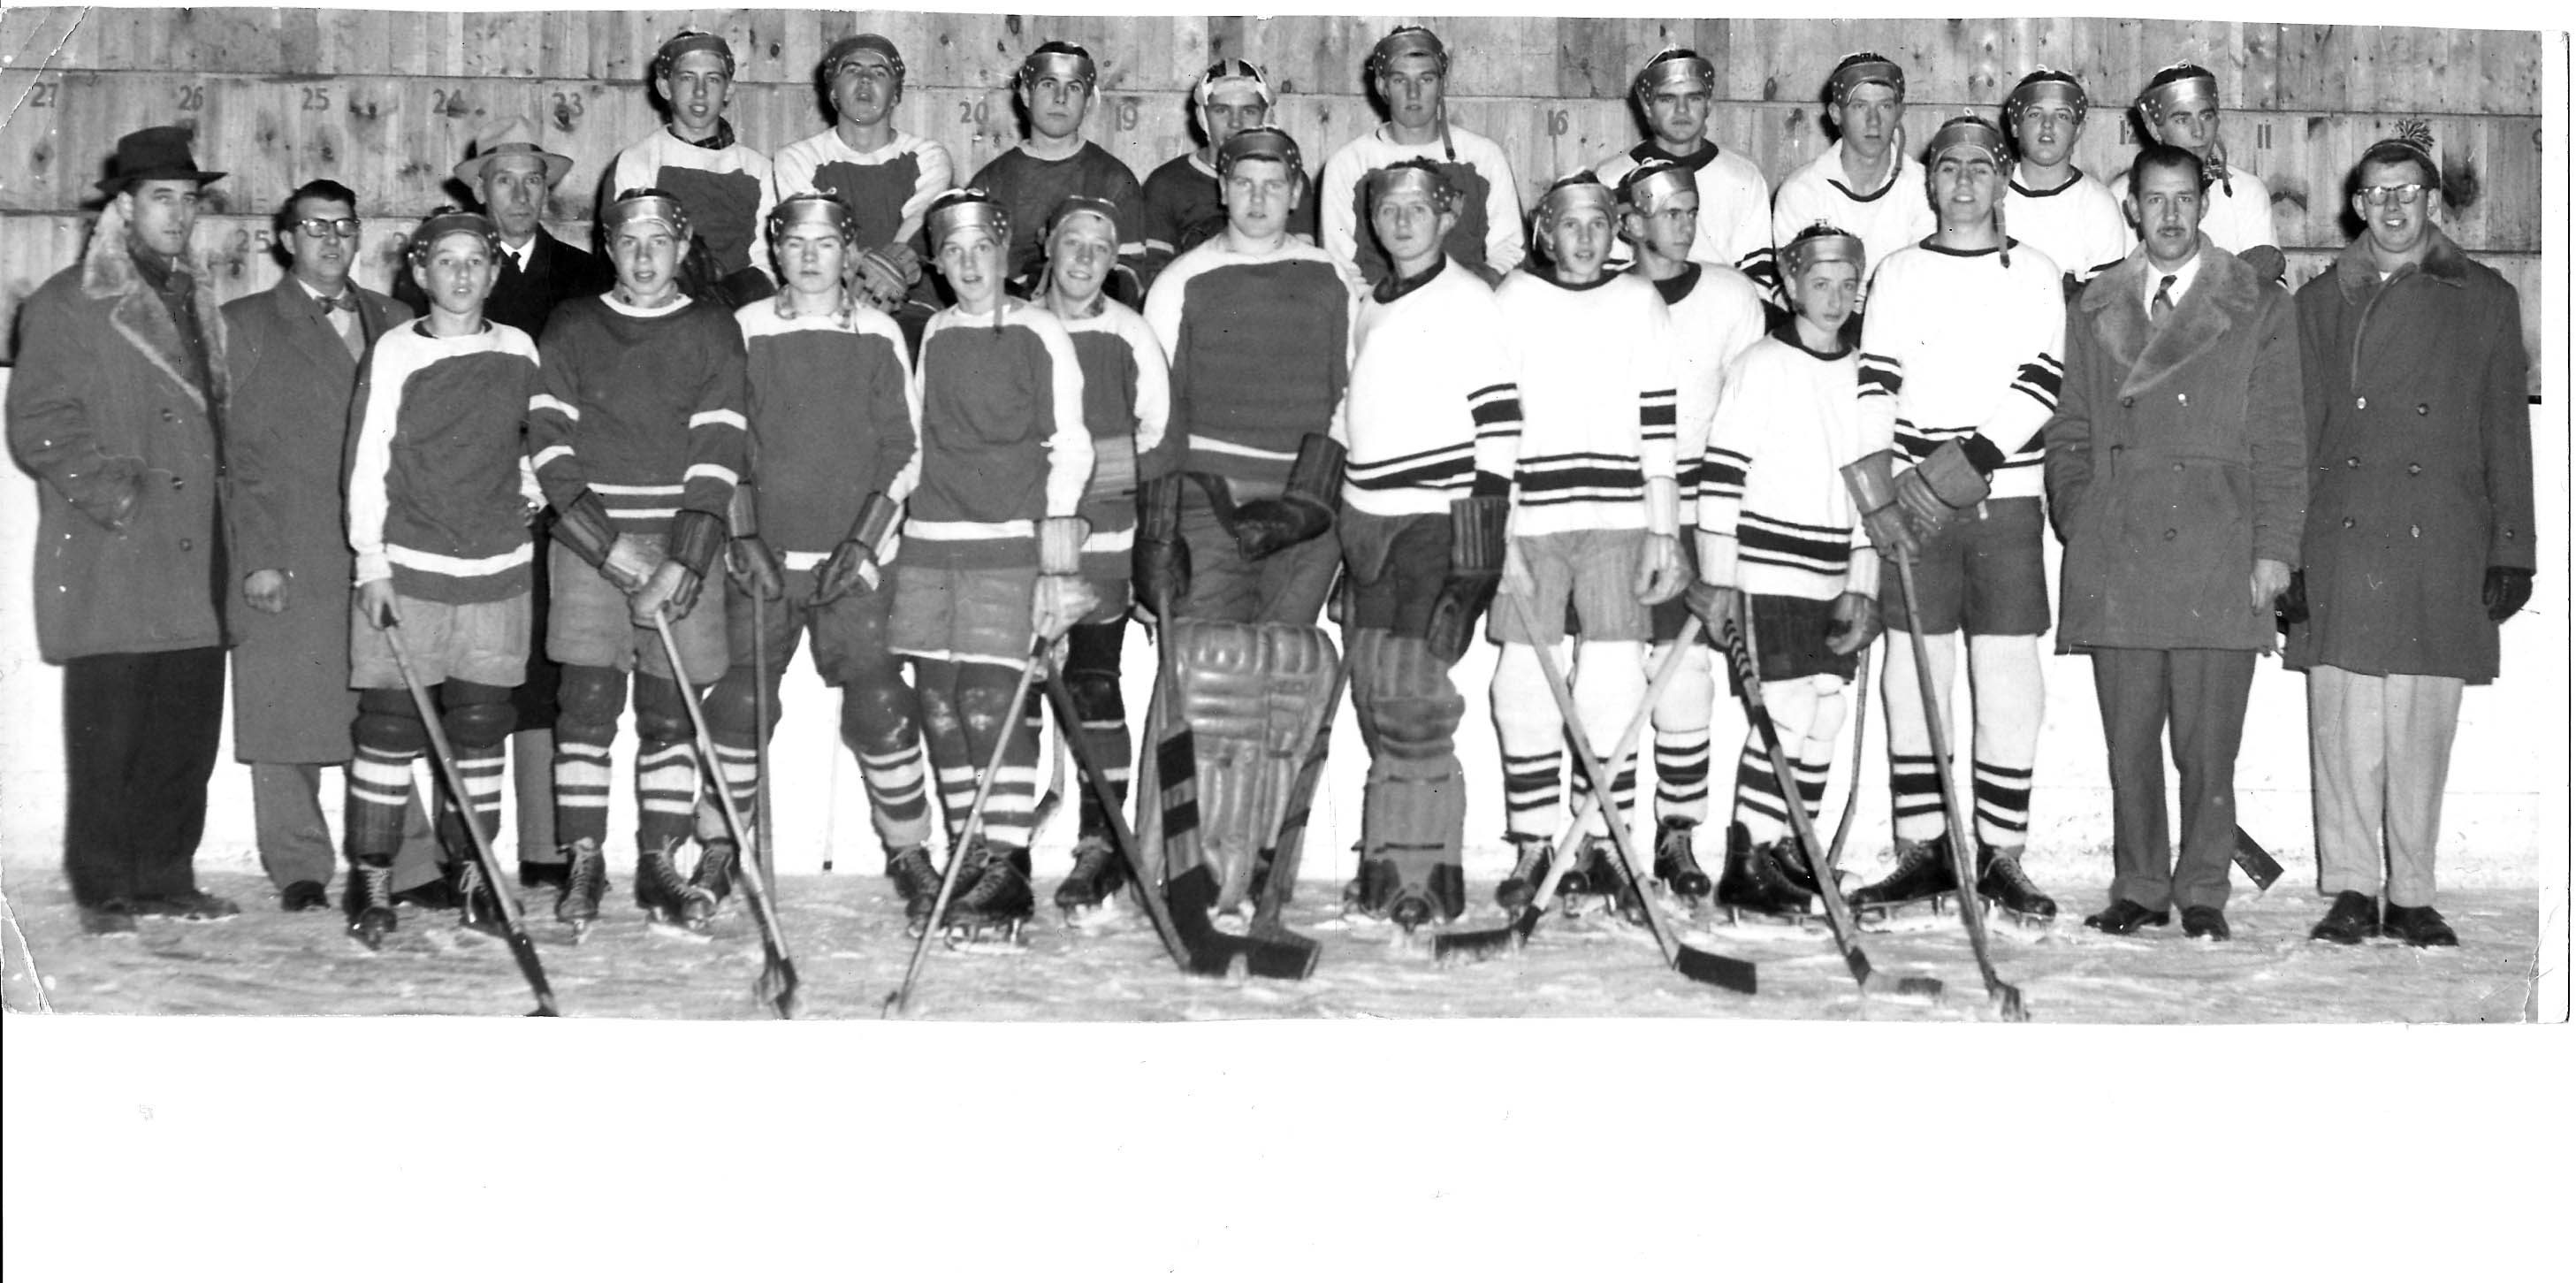 1958 CCHL - who are they